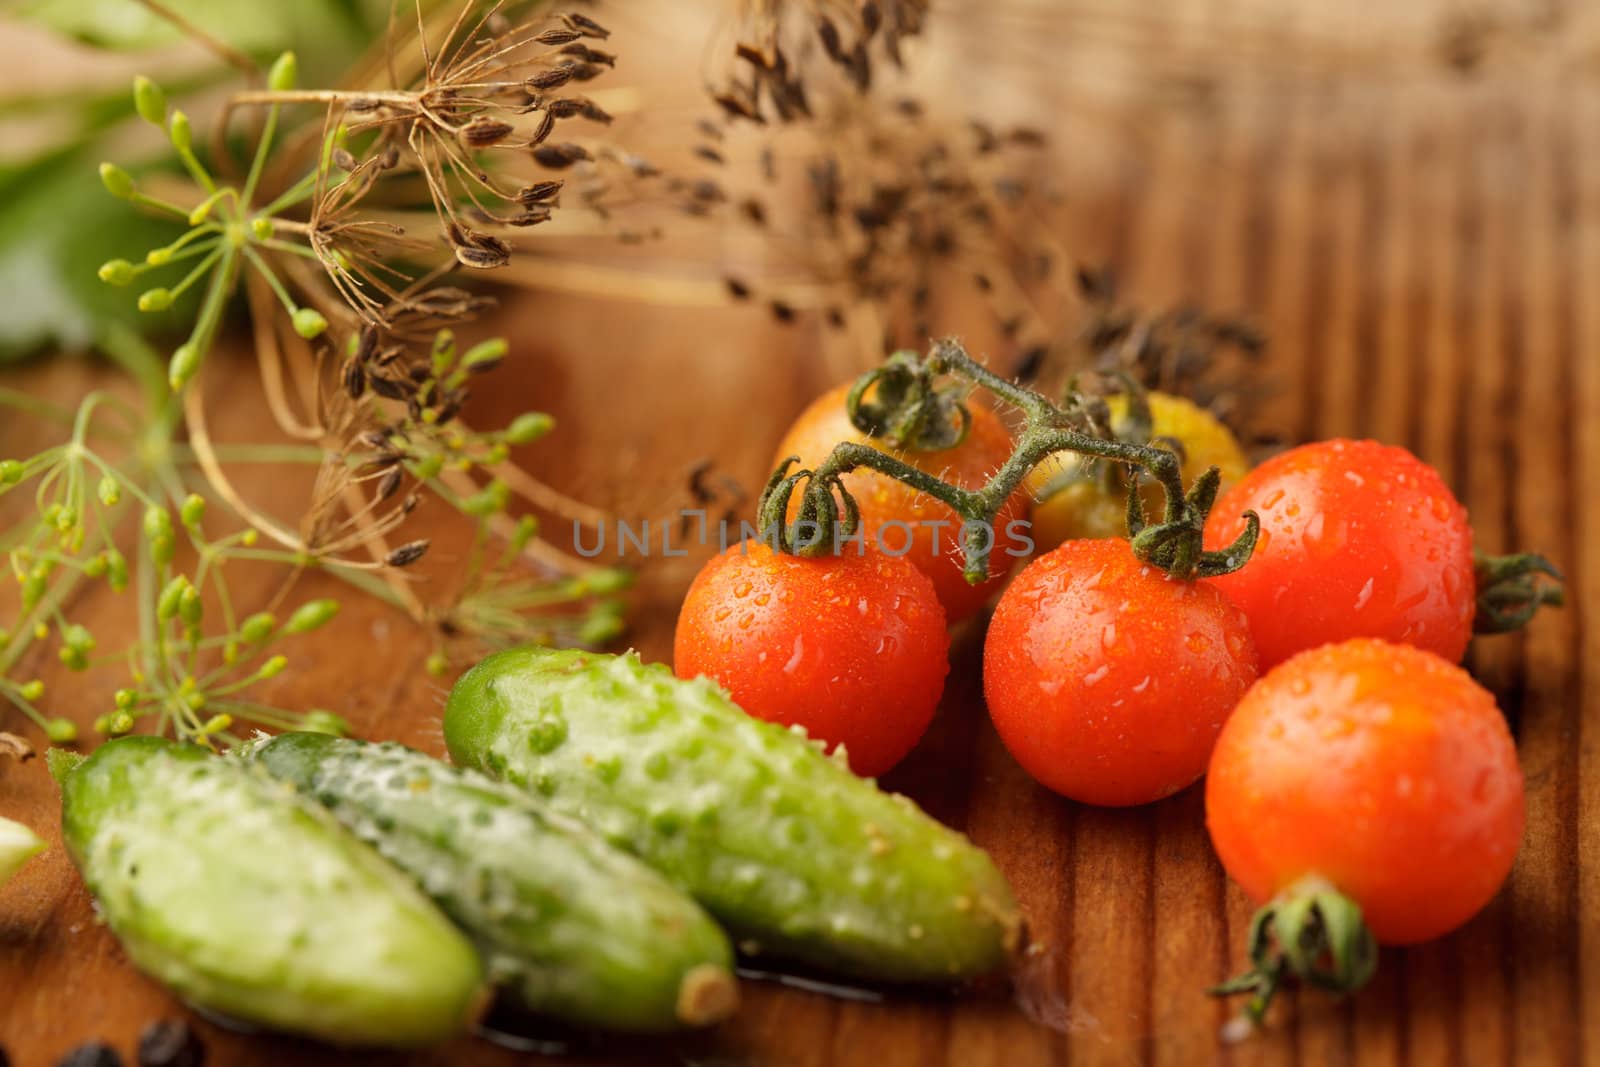 Tomatoes and cucumgers by oksix